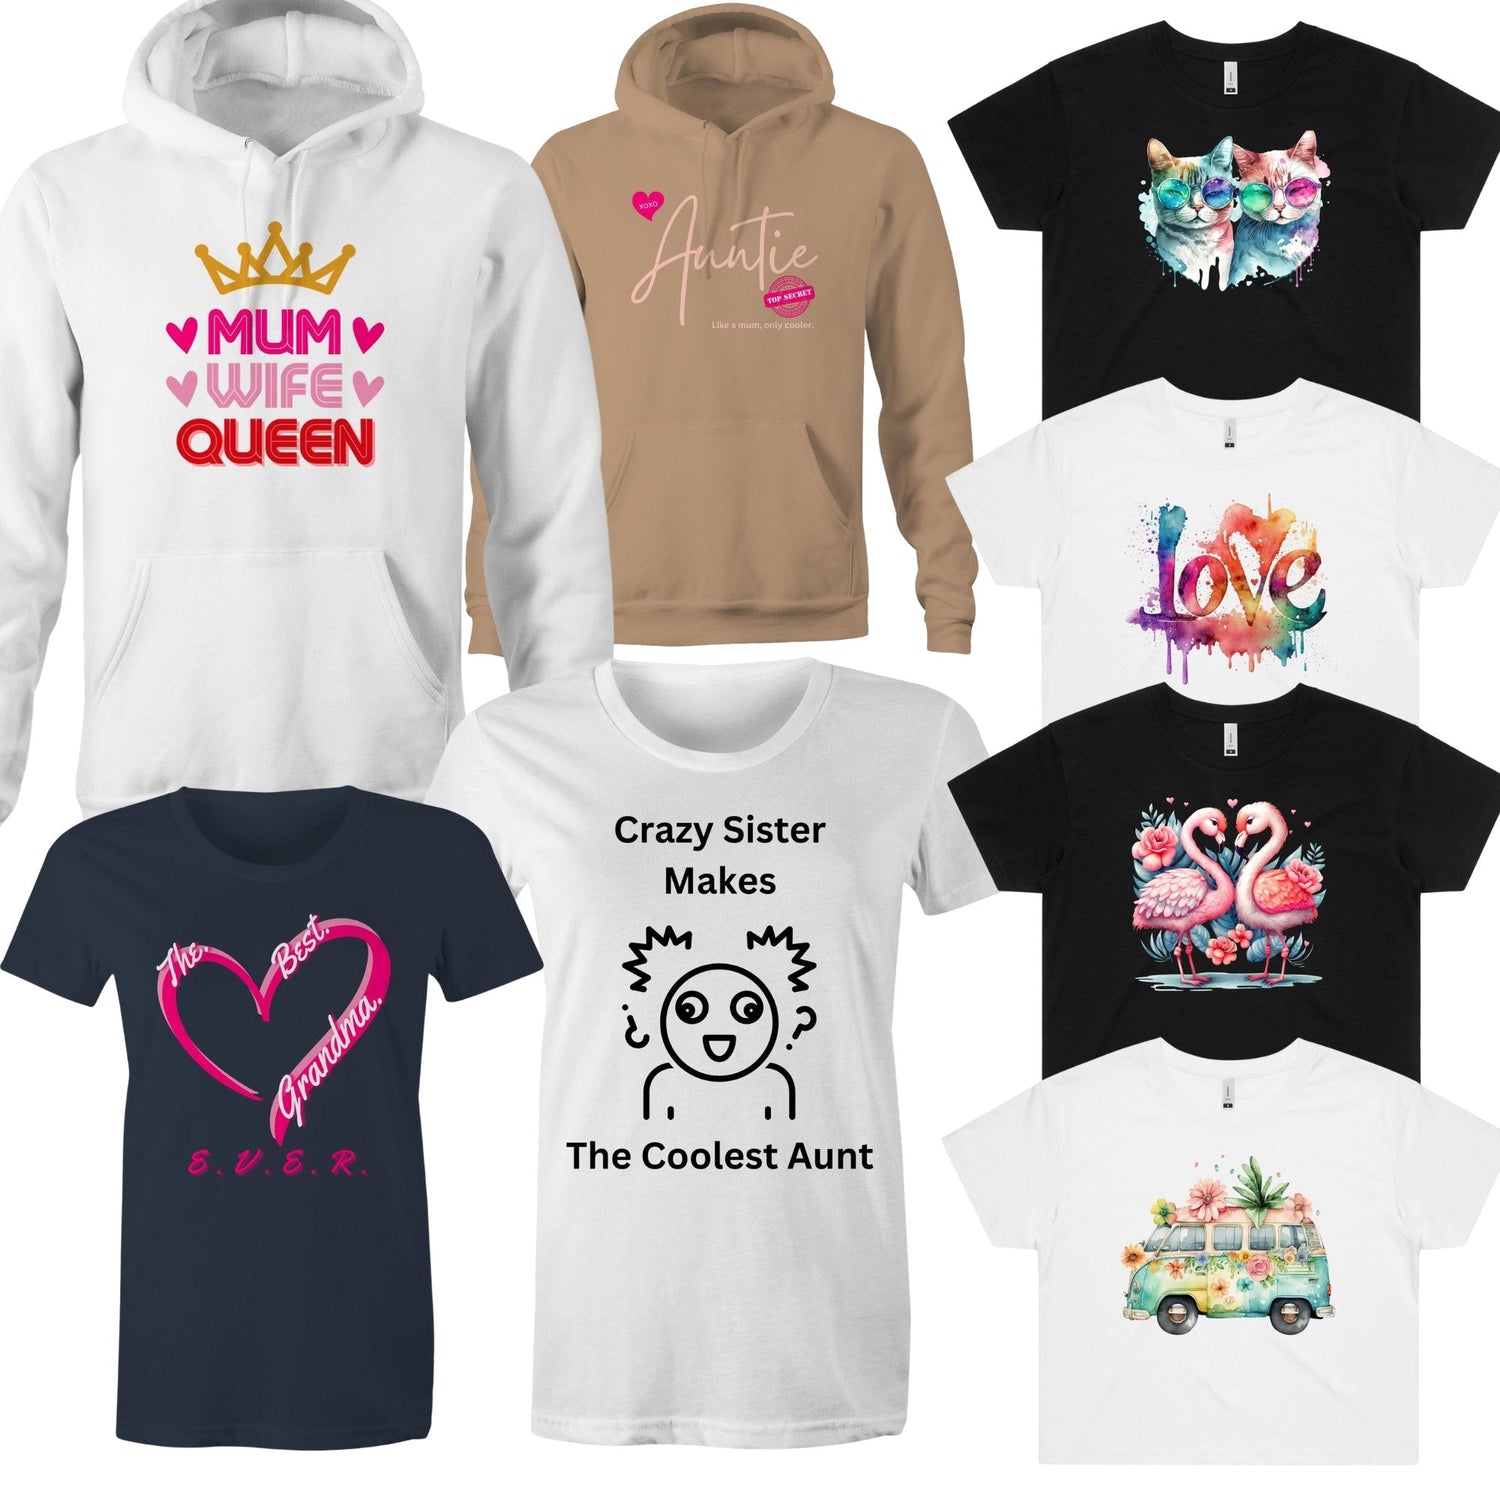 Women's Clothing - variety of unique T-shirts and hoodies with prints designed expression of love - Da Boss Mango